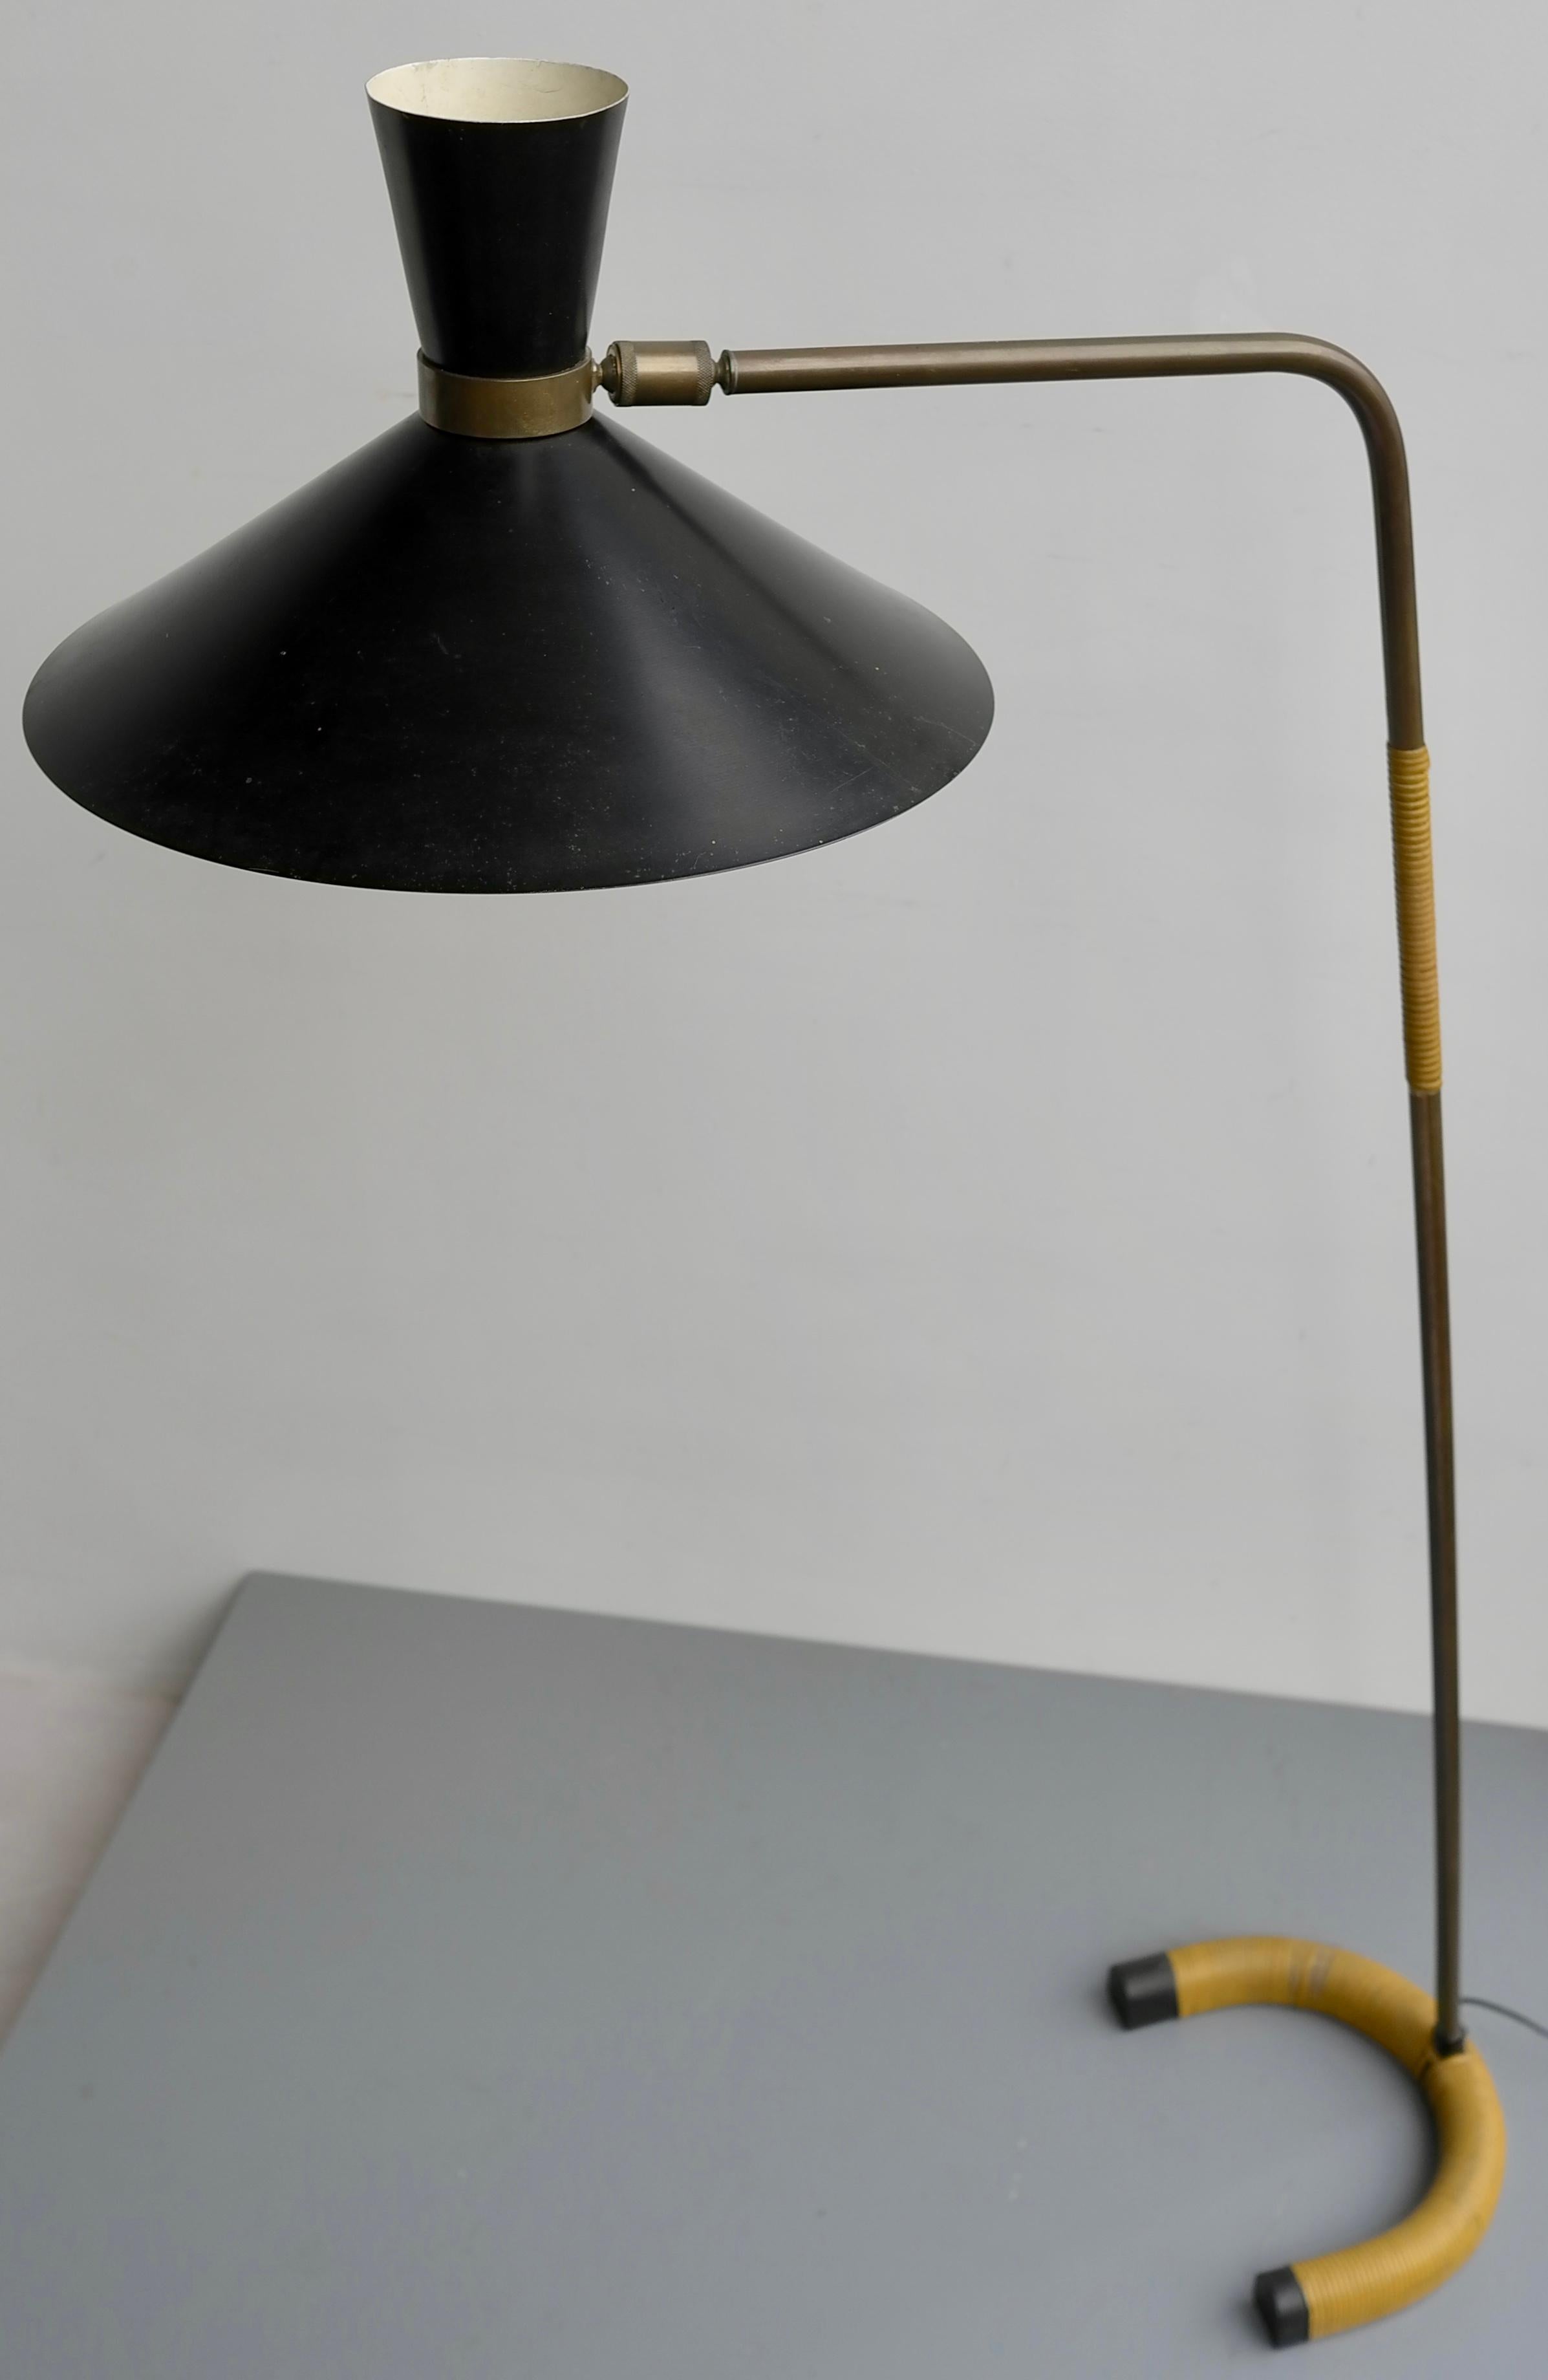 Rare French floor lamp by Jacques Biny in brass and black hood Edition Luminalite 1953 

The lamp is bamboo wrapped on the foot and rod.